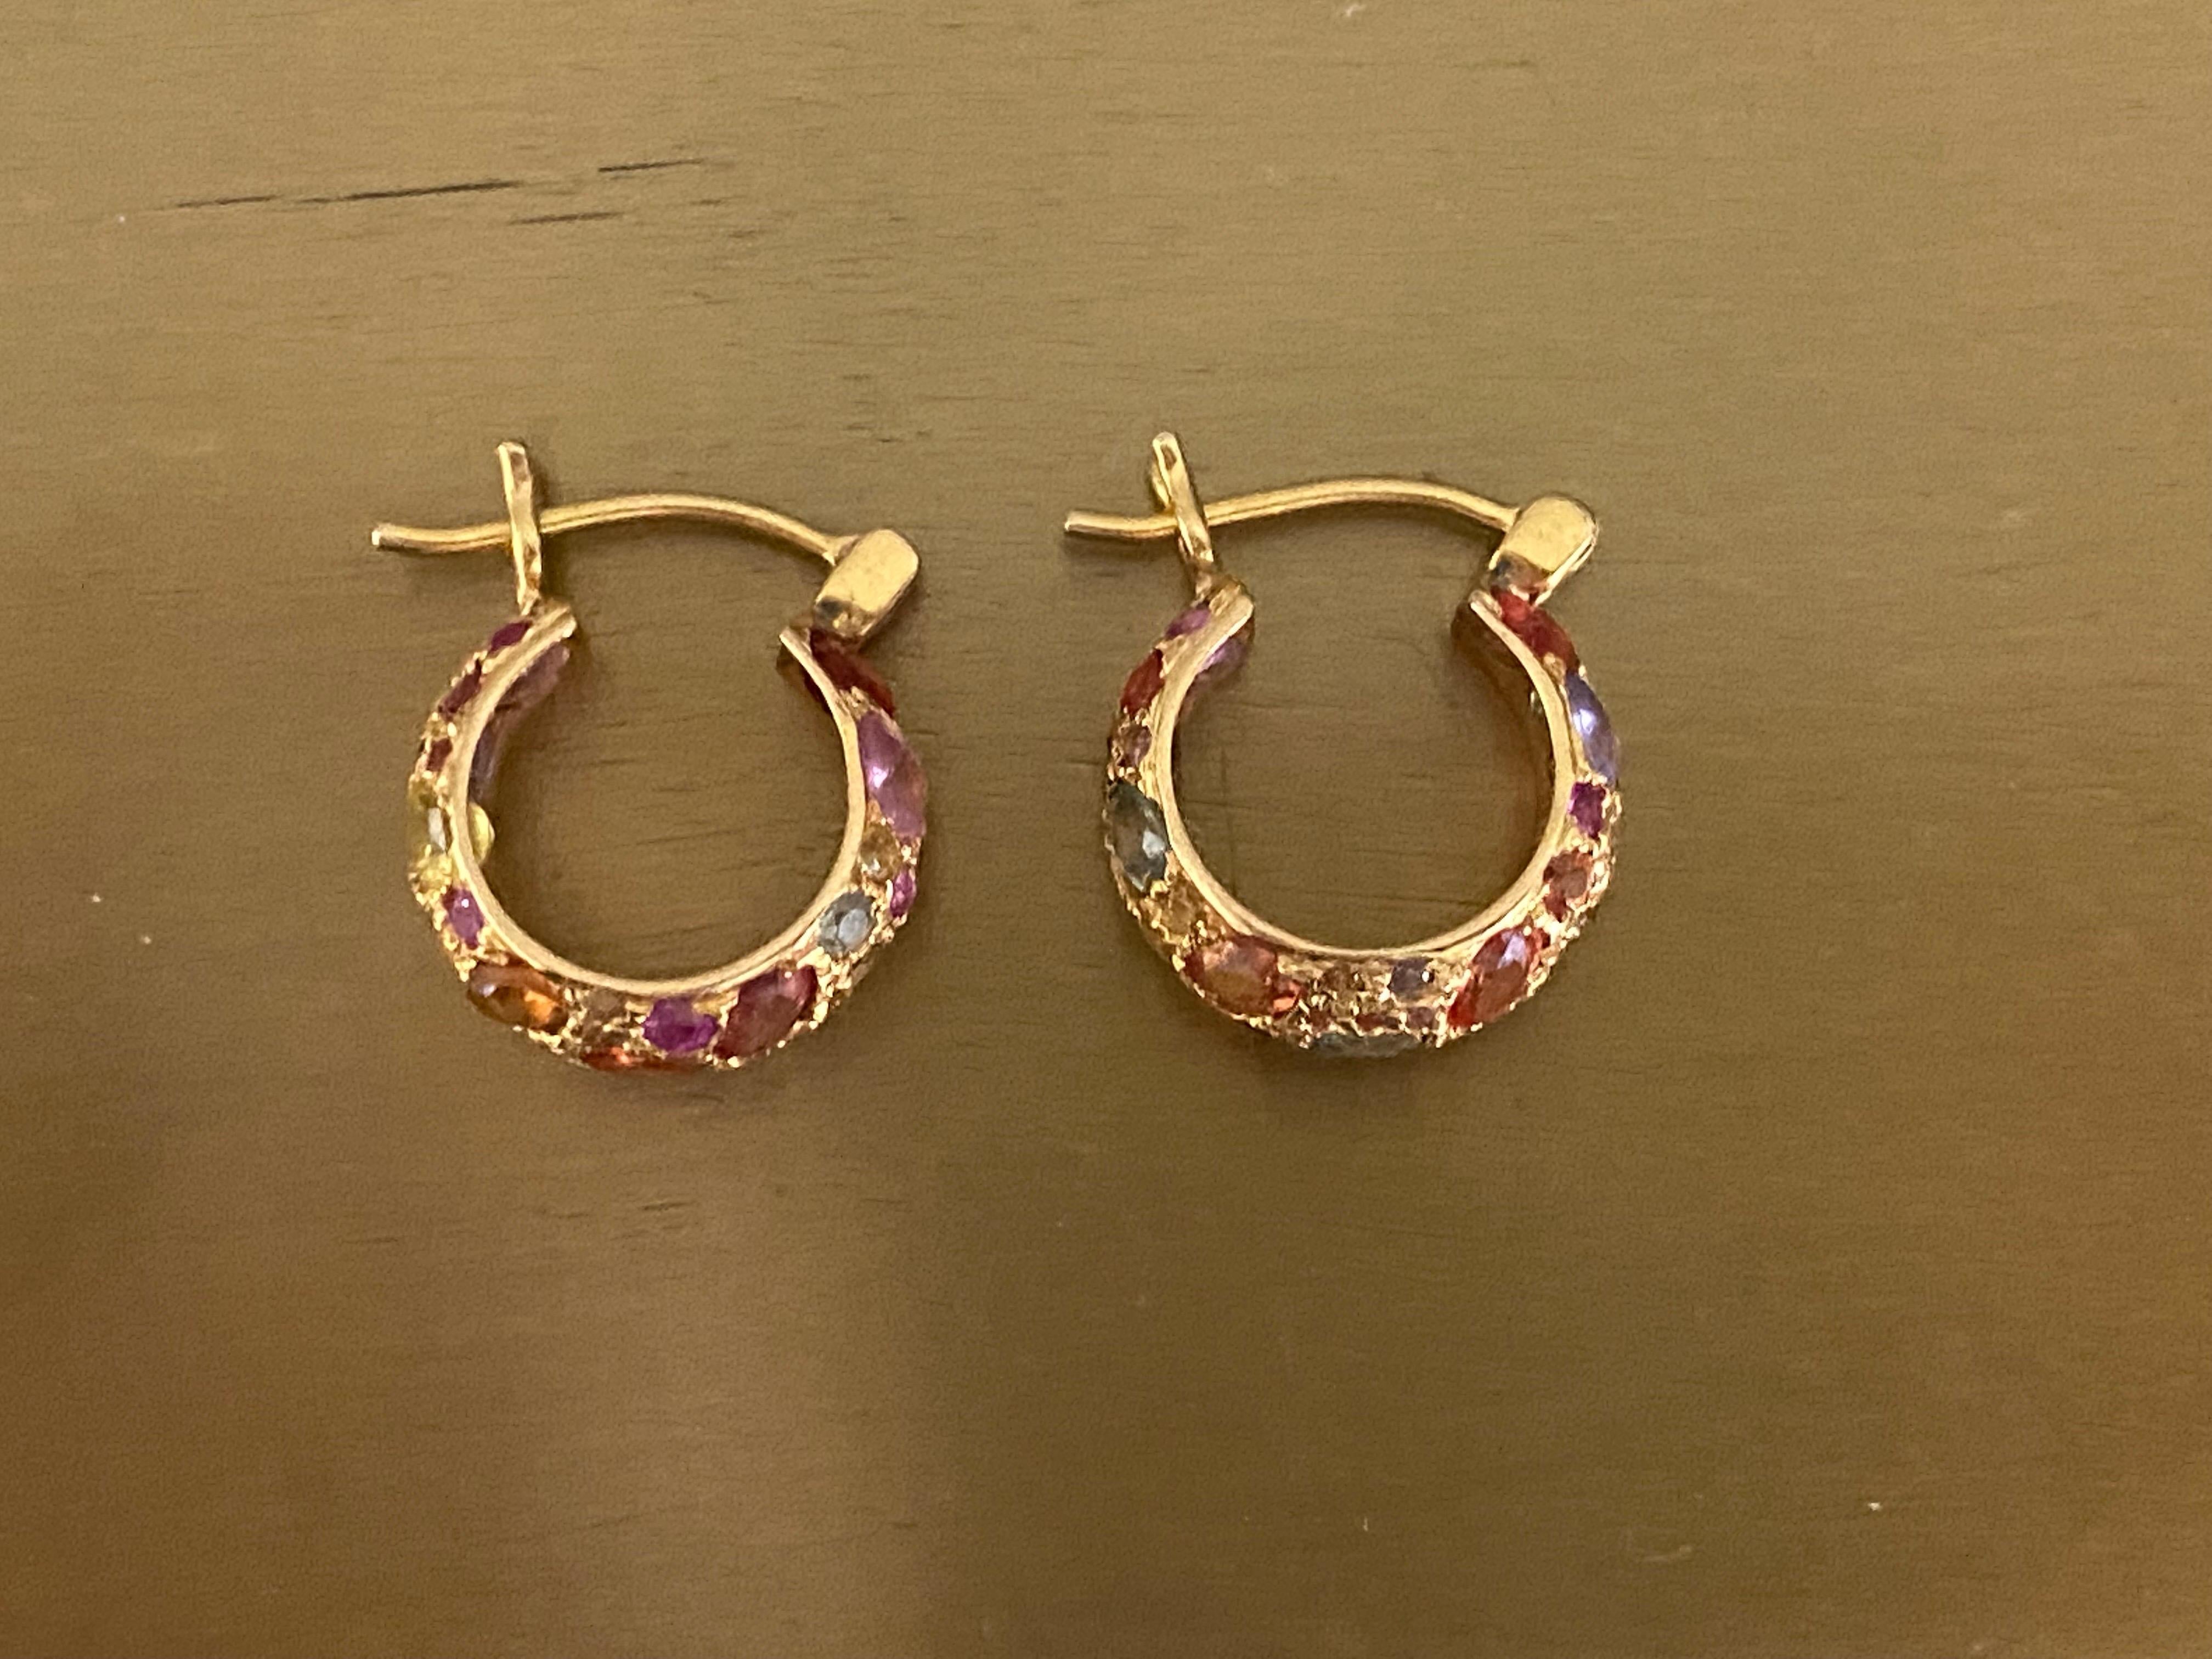 6.4 Carats Multicolored Sapphires in 18kt Gold Hoops by Lauren Harper For Sale 4